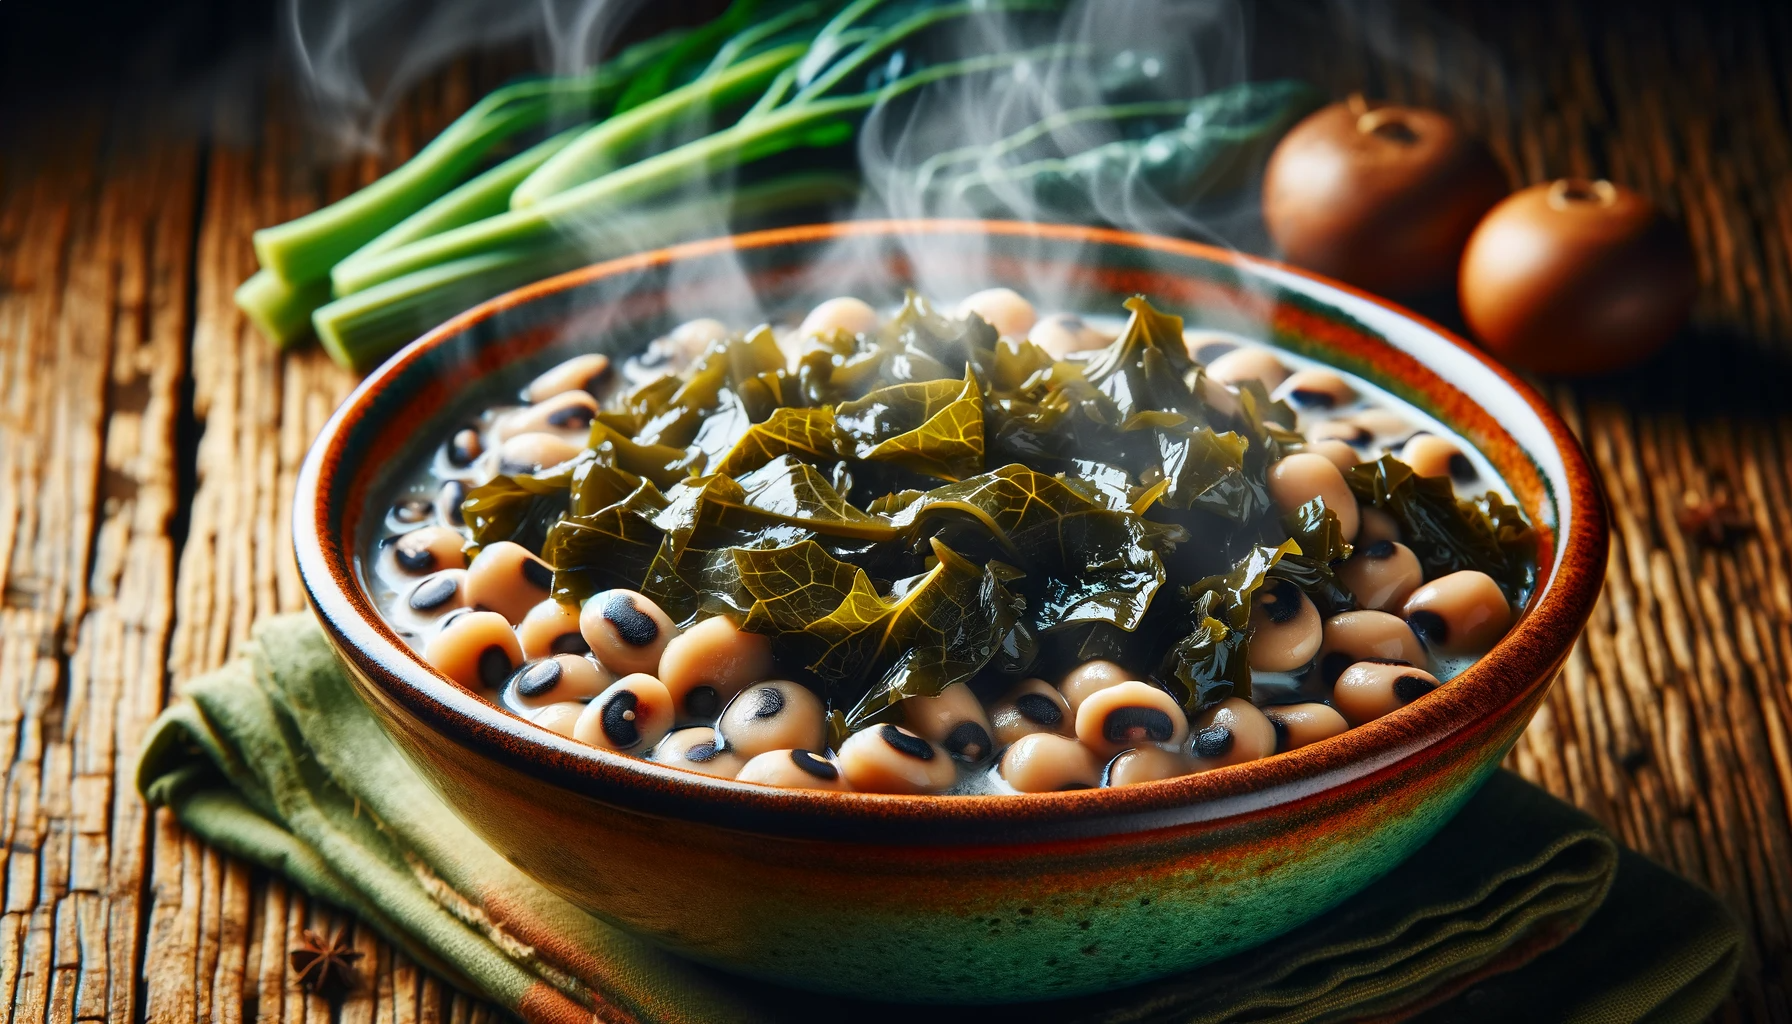 A close up image of a bowl filled with Black Eyed Peas and Collard Greens